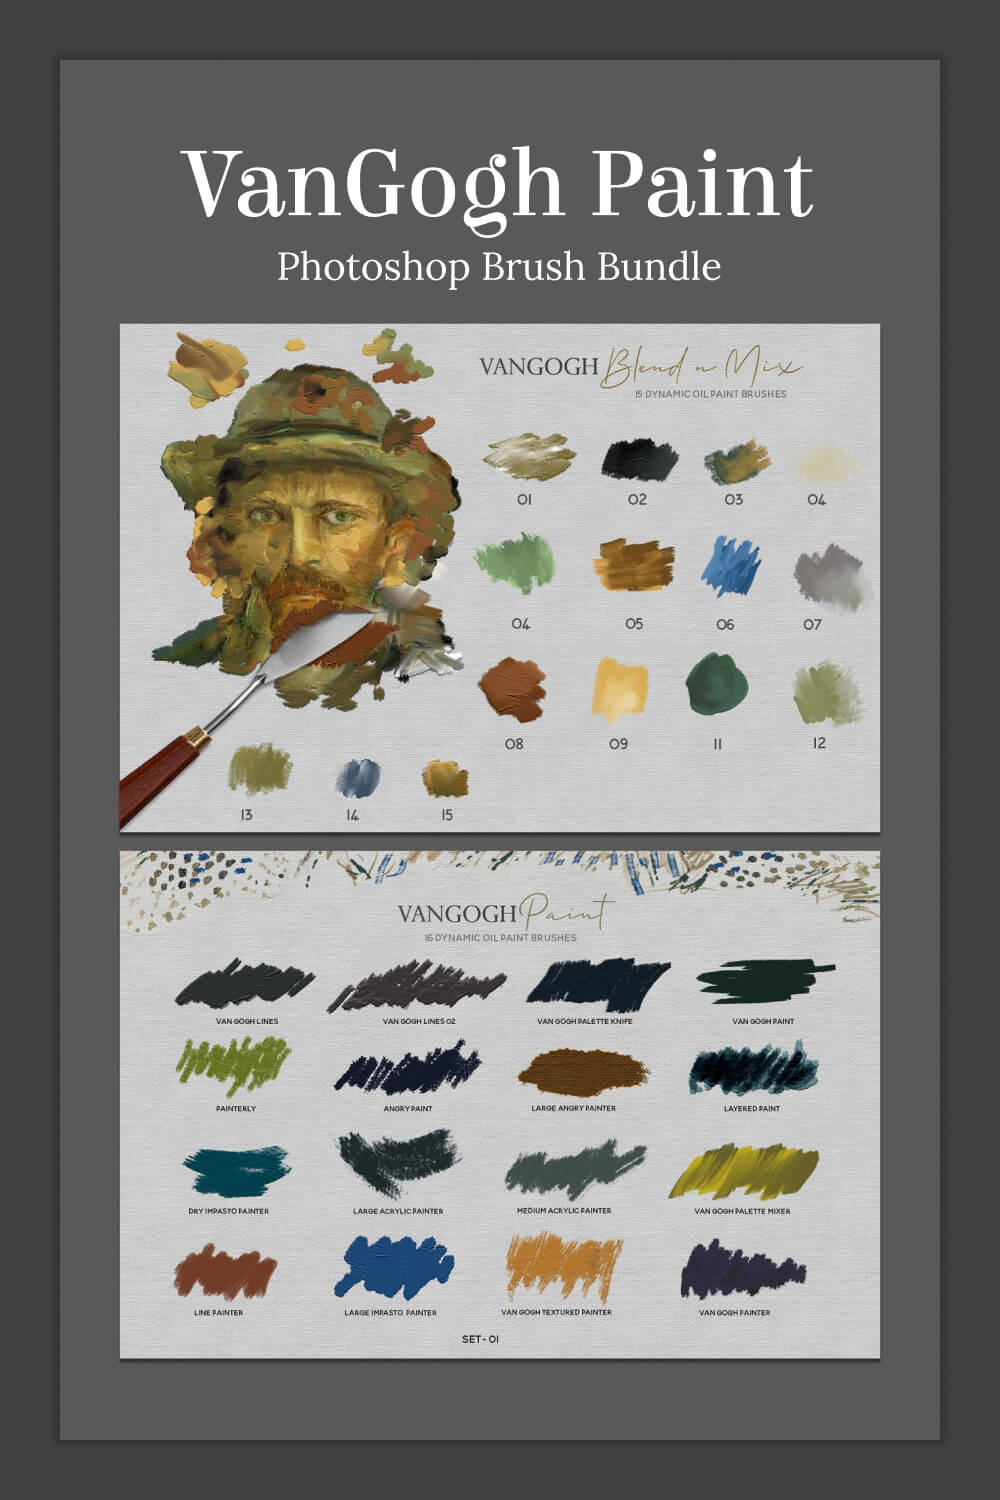 Picture for Pinterest with VanGogh Paint Photoshop Brush Bundle.